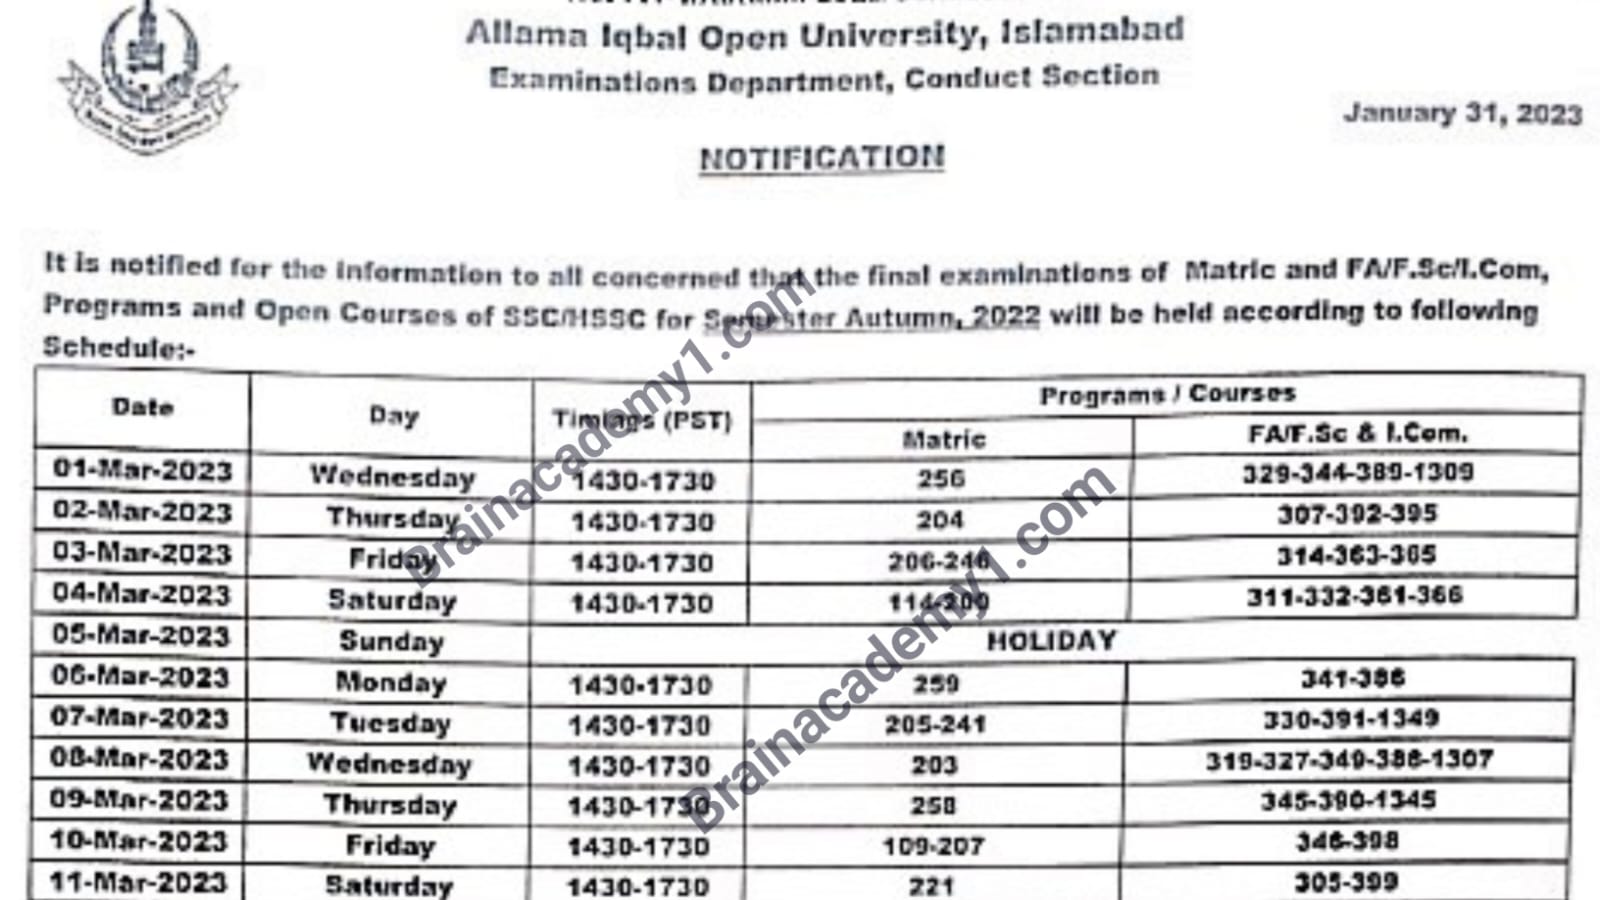 aiou last date of assignment autumn 2022